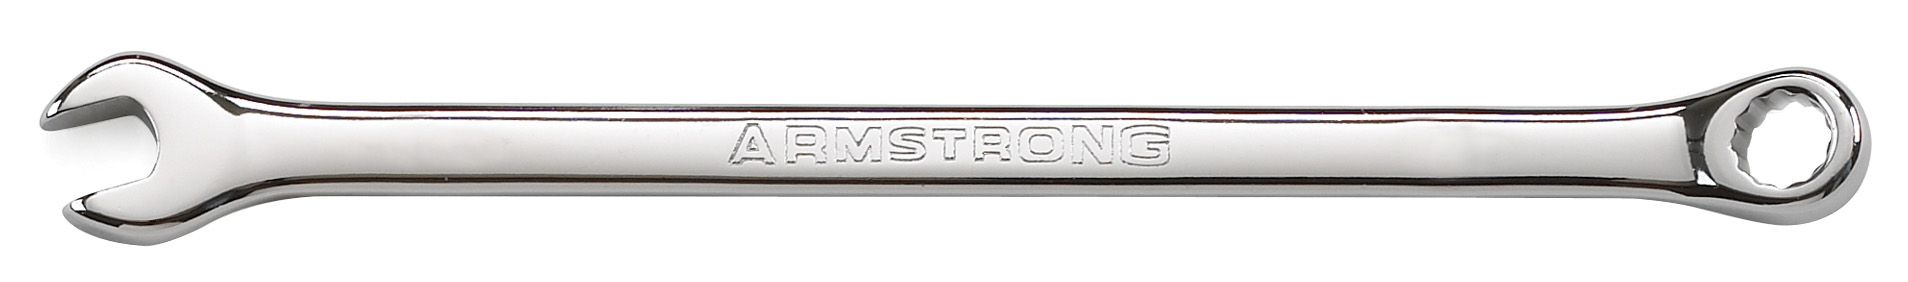 Armstrong 50 mm 12 pt. Full Polish Long Combination Wrench